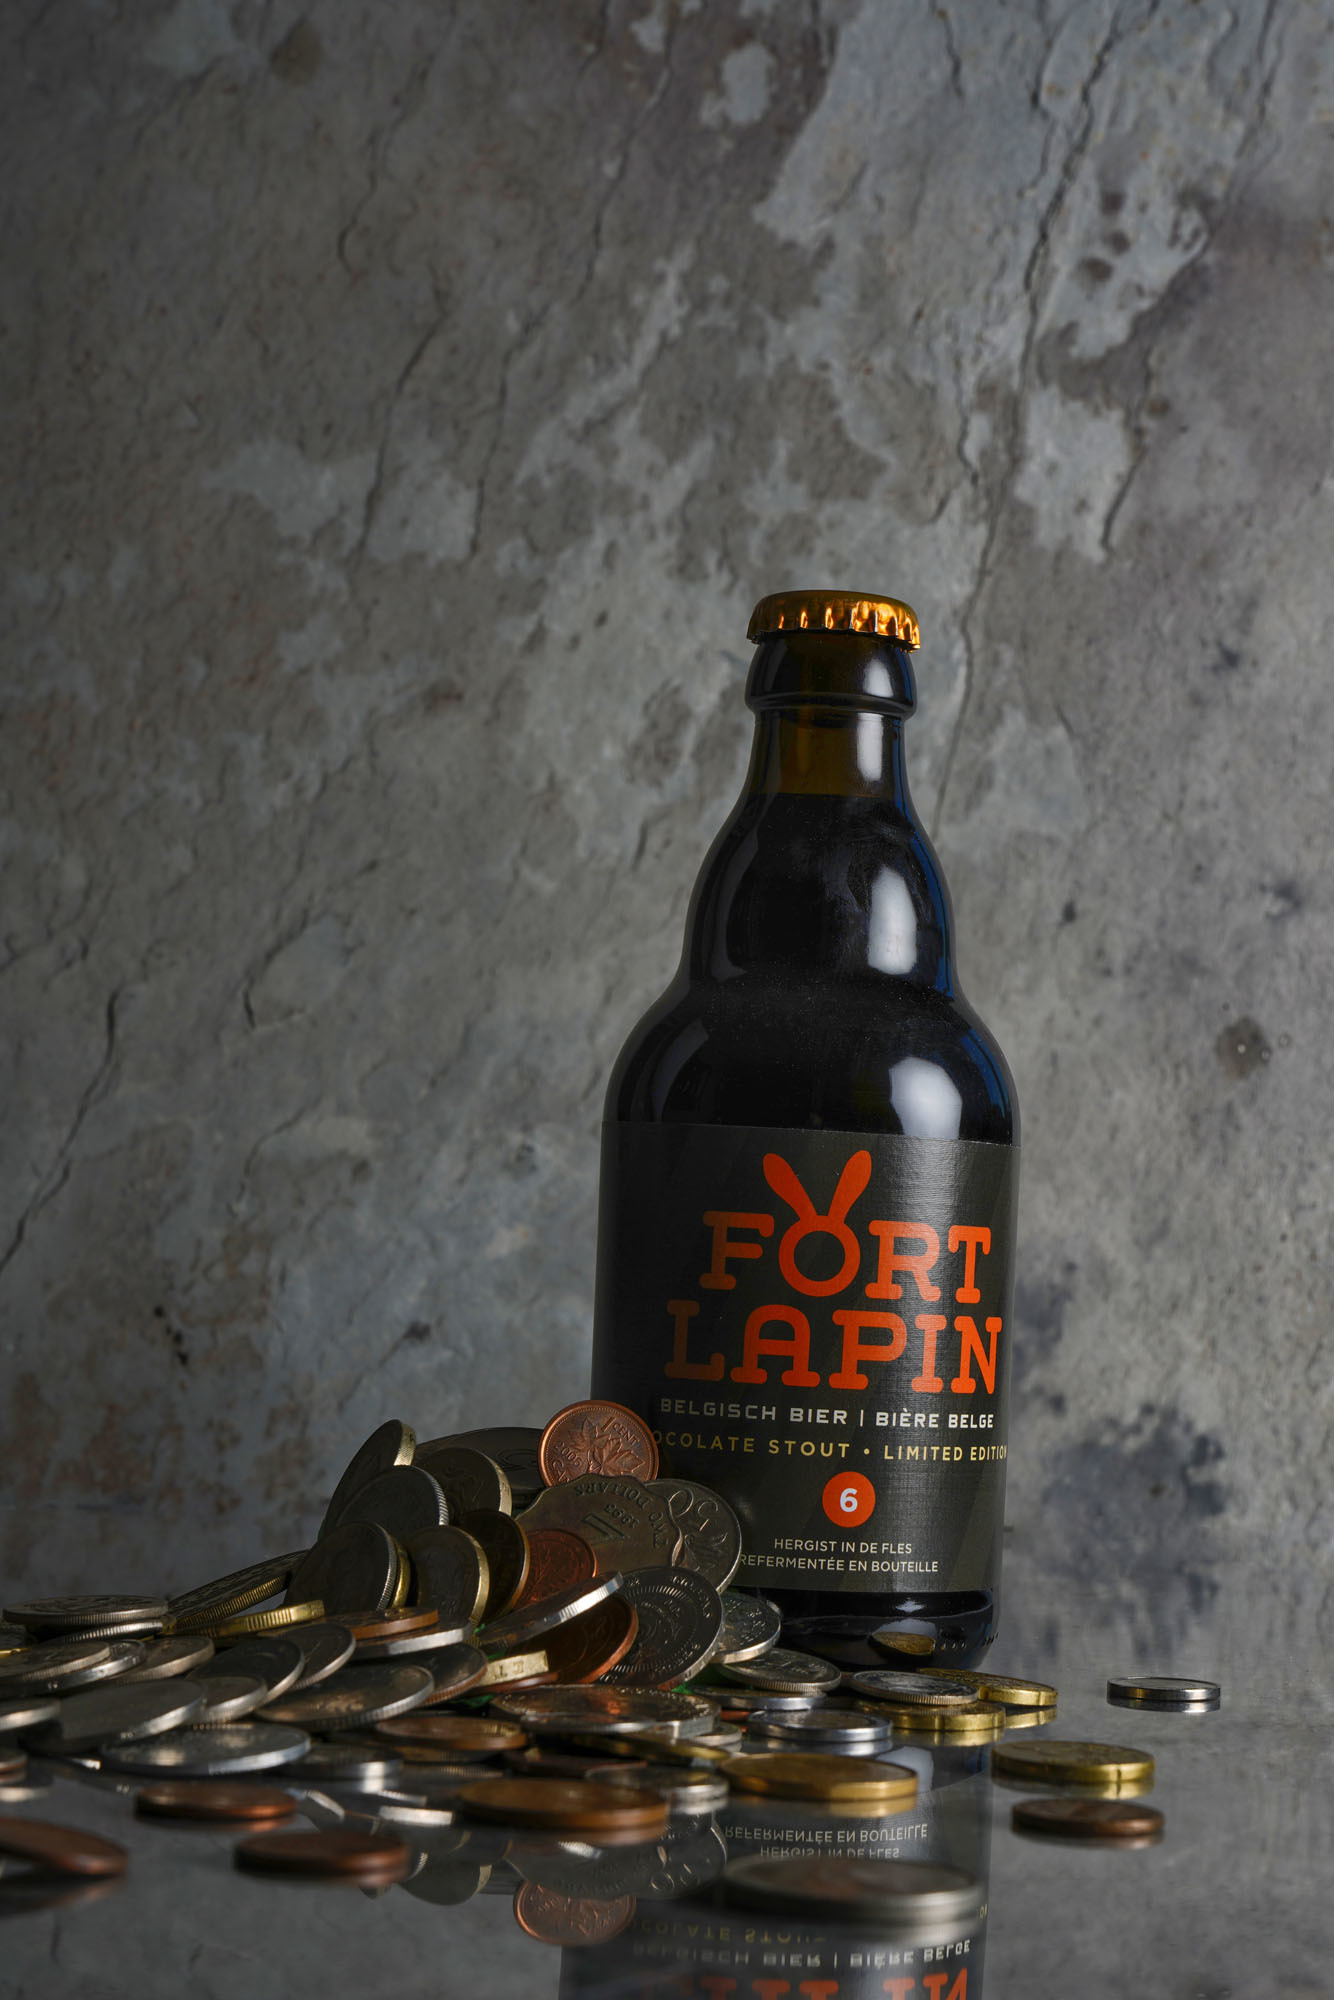 Fort Lapin Chocolate Stout